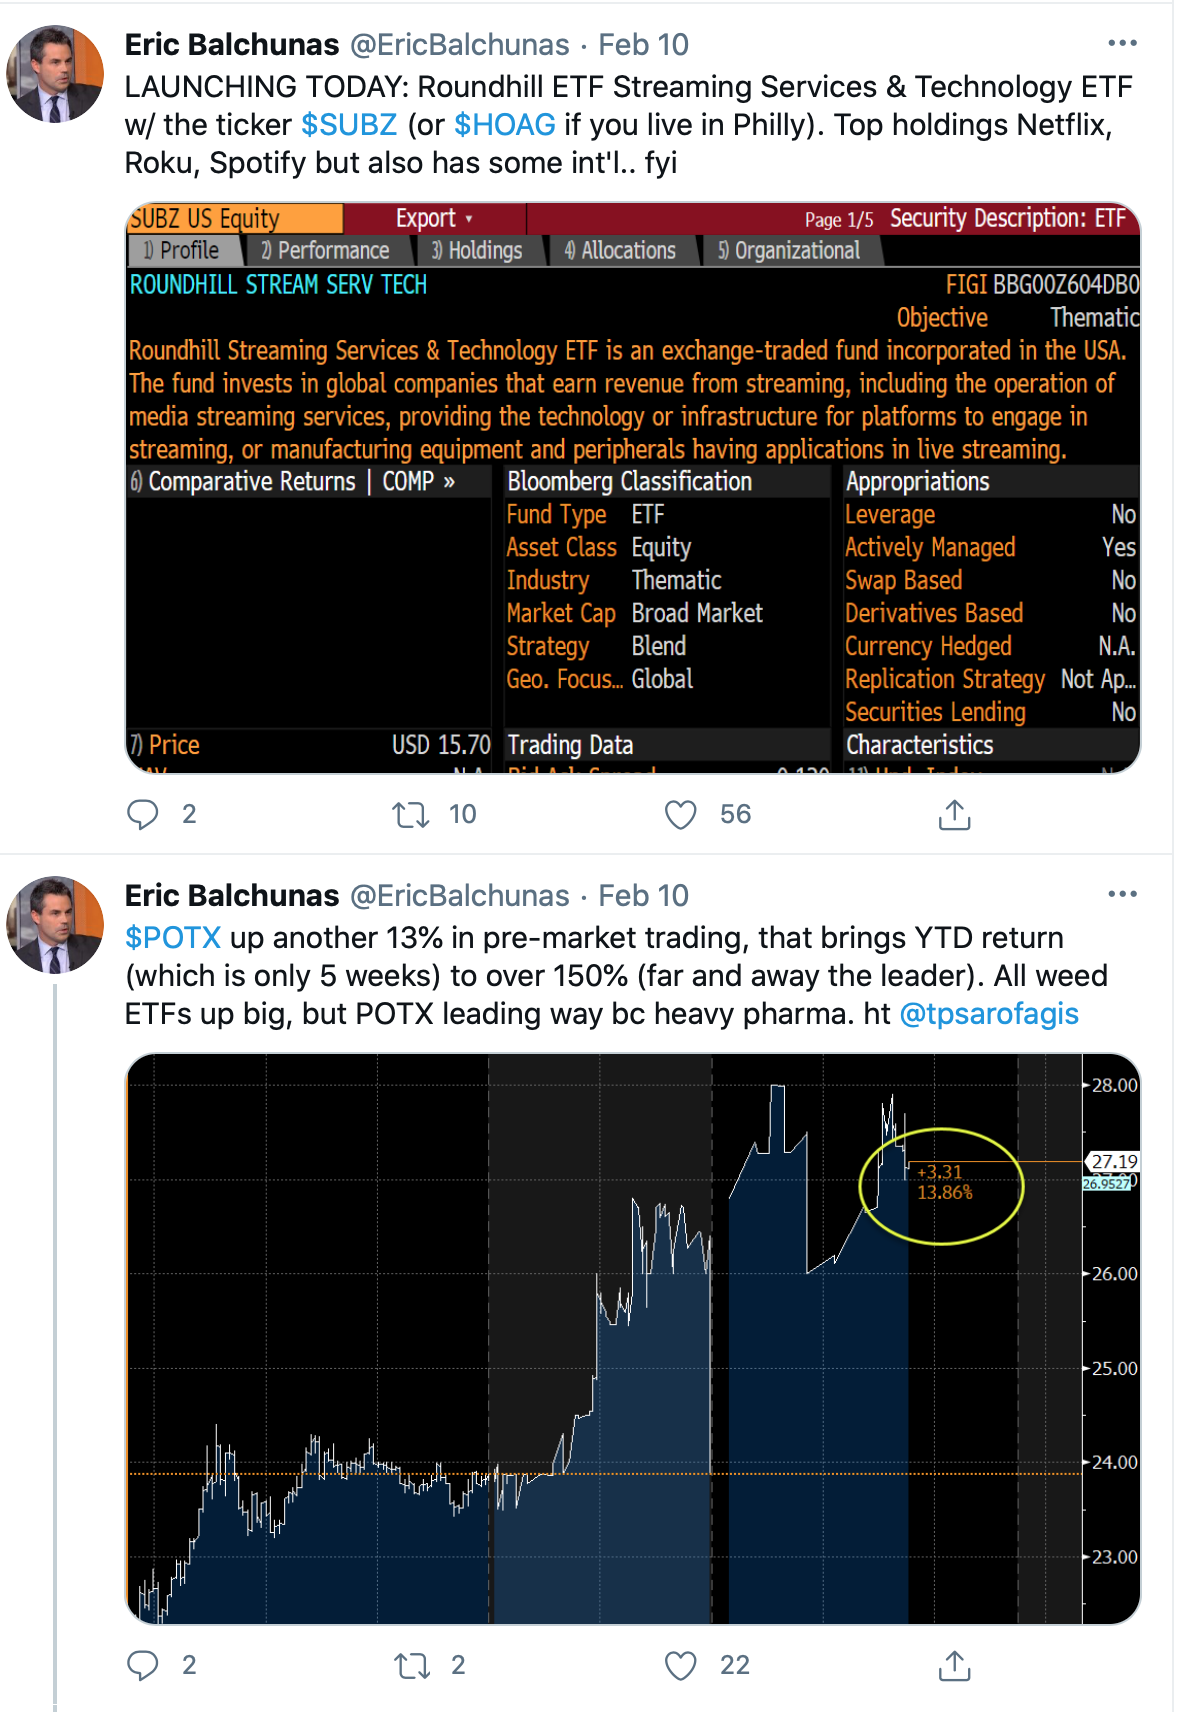 More examples of specific ETF themes. Source: Twitter